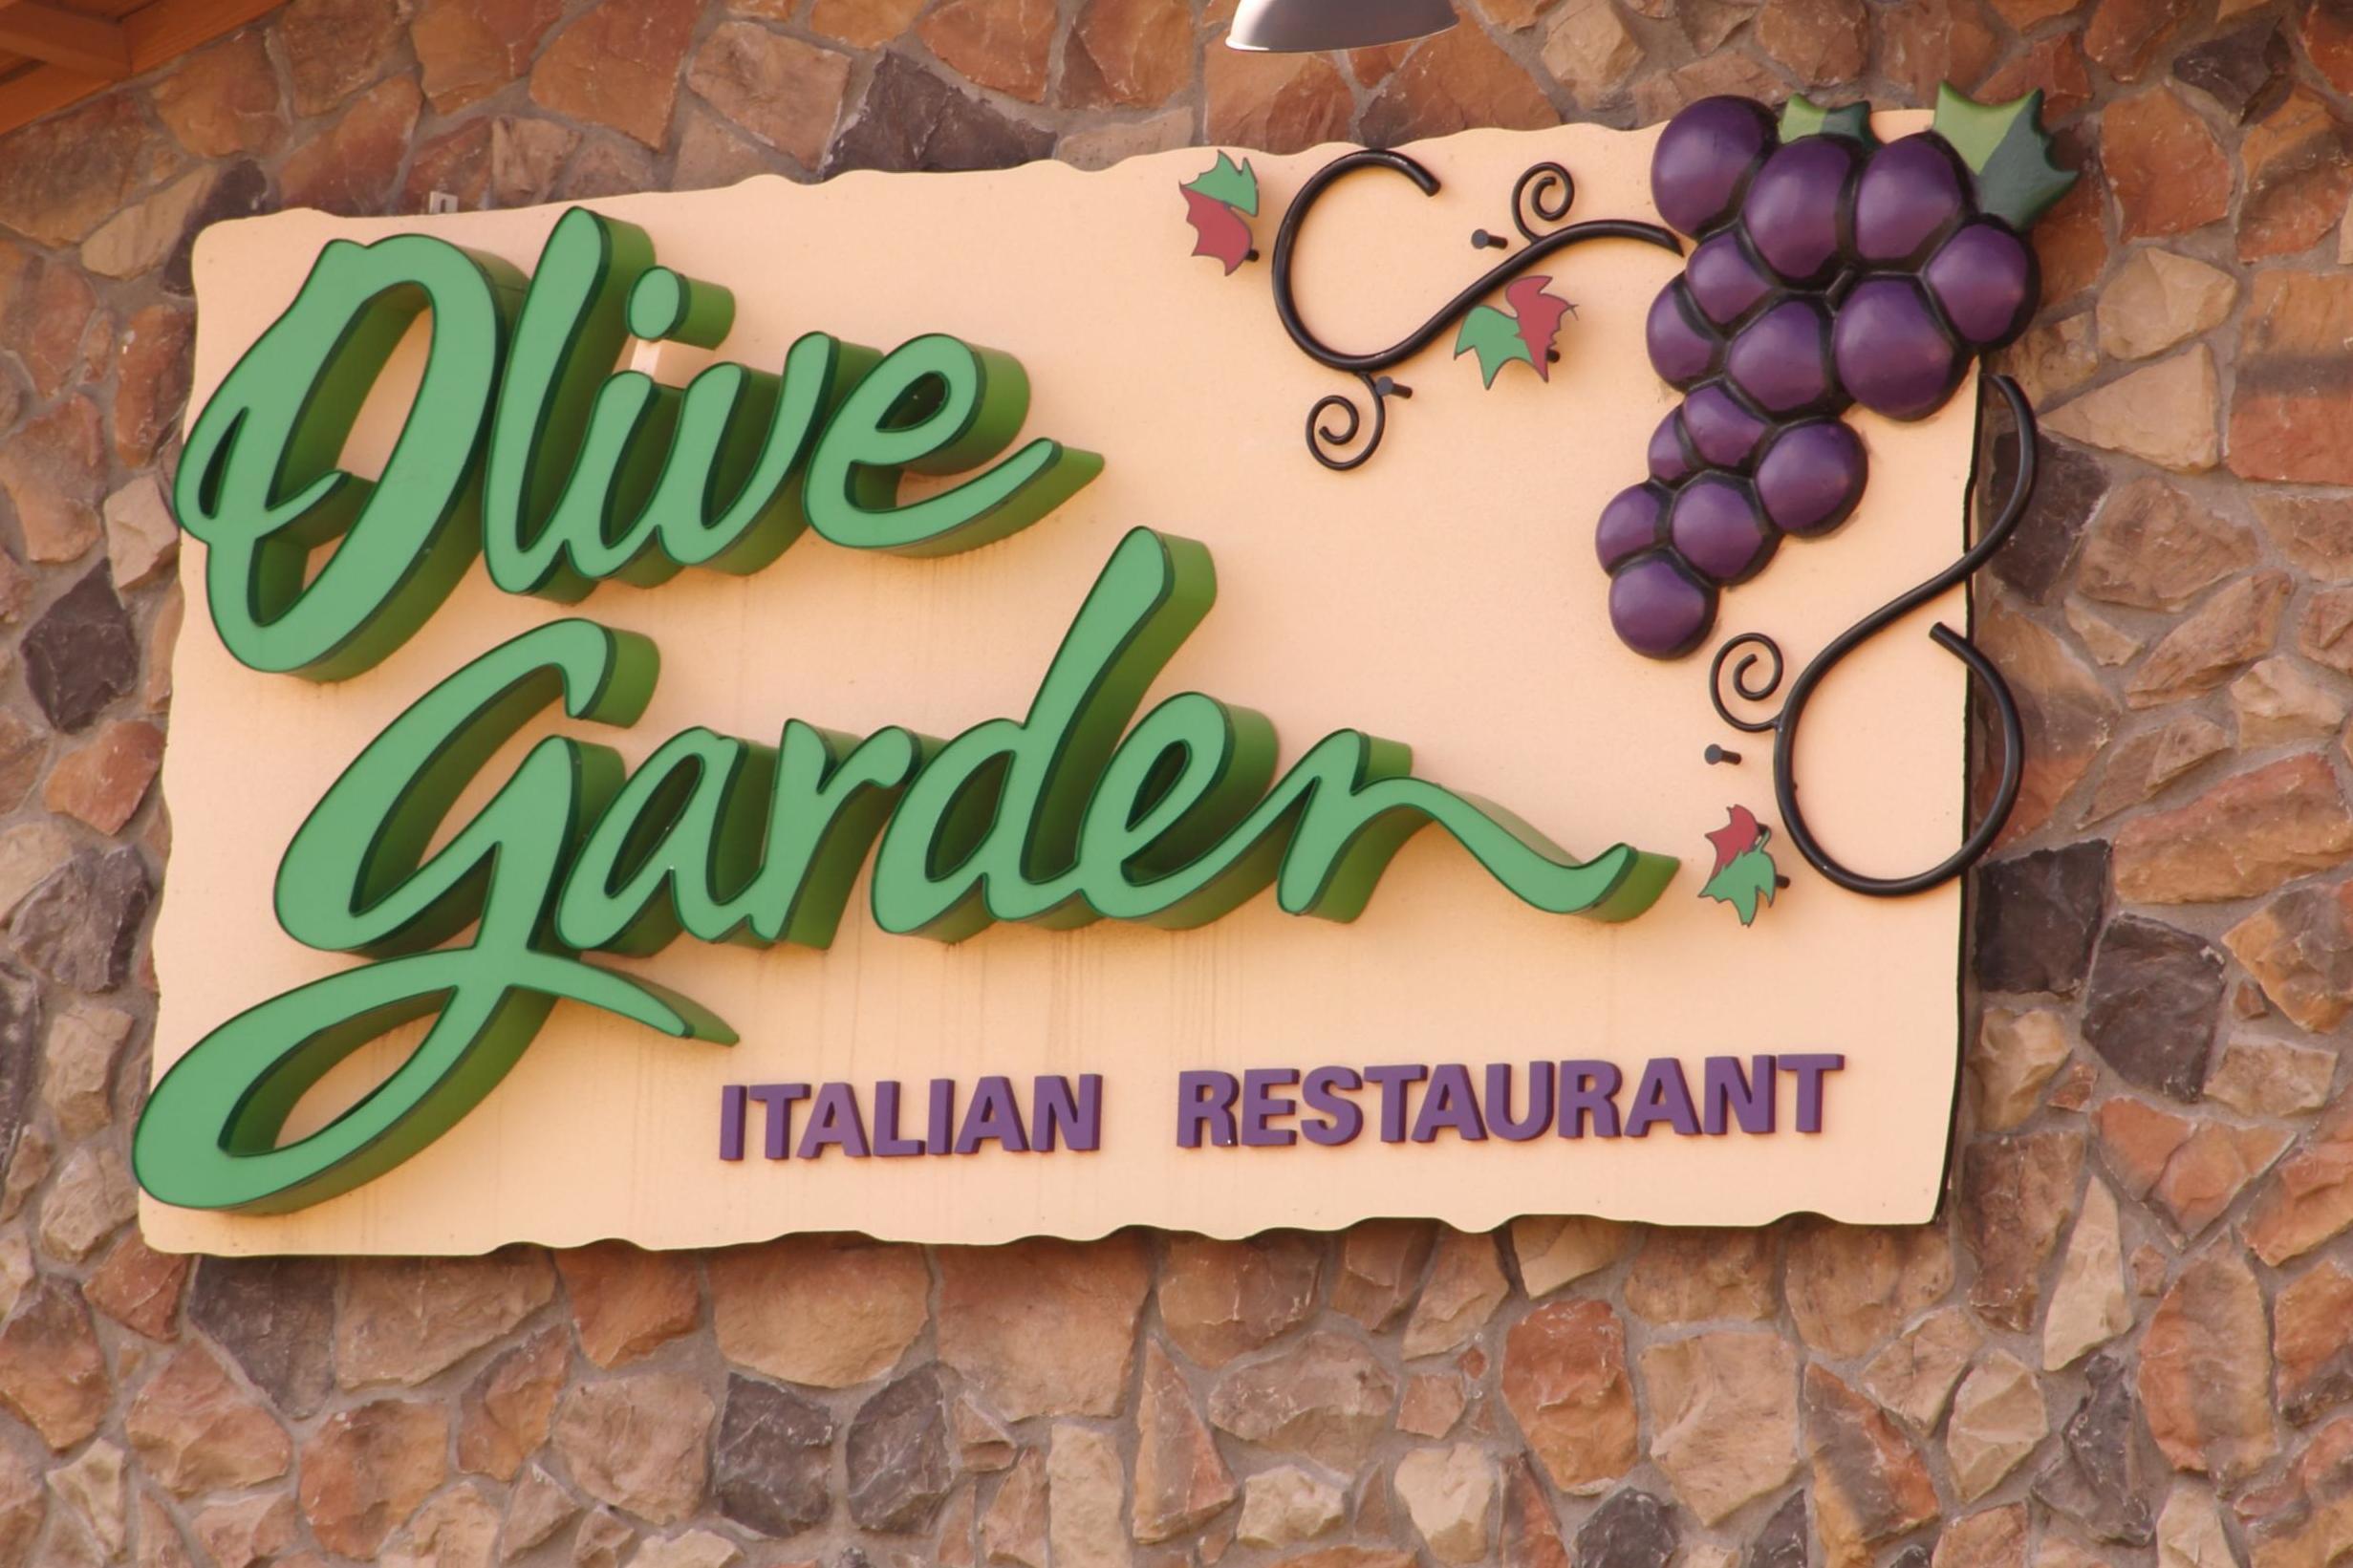 Olive Garden Denies It Donated To Trump Re Election Campaign Amid